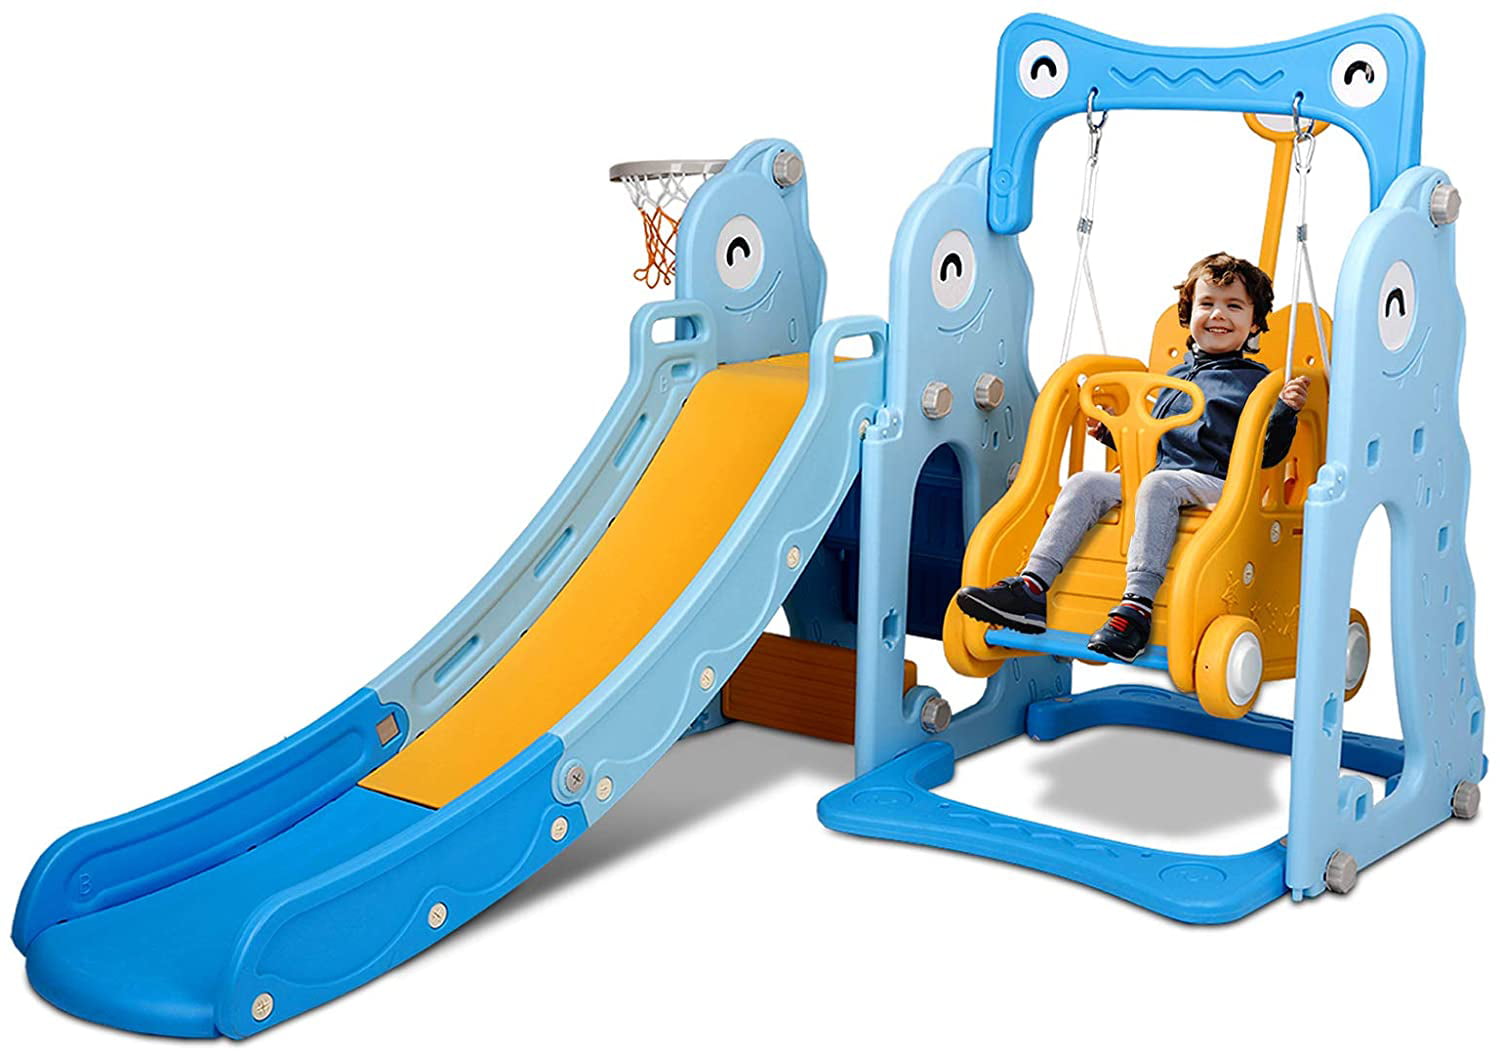 Toddler Climber and Swing Set Stock in UK Kids Playset with Music Machine and Shoot Blue Kids Freestanding Climber Playground Children Activity Center for Indoor & Backyard